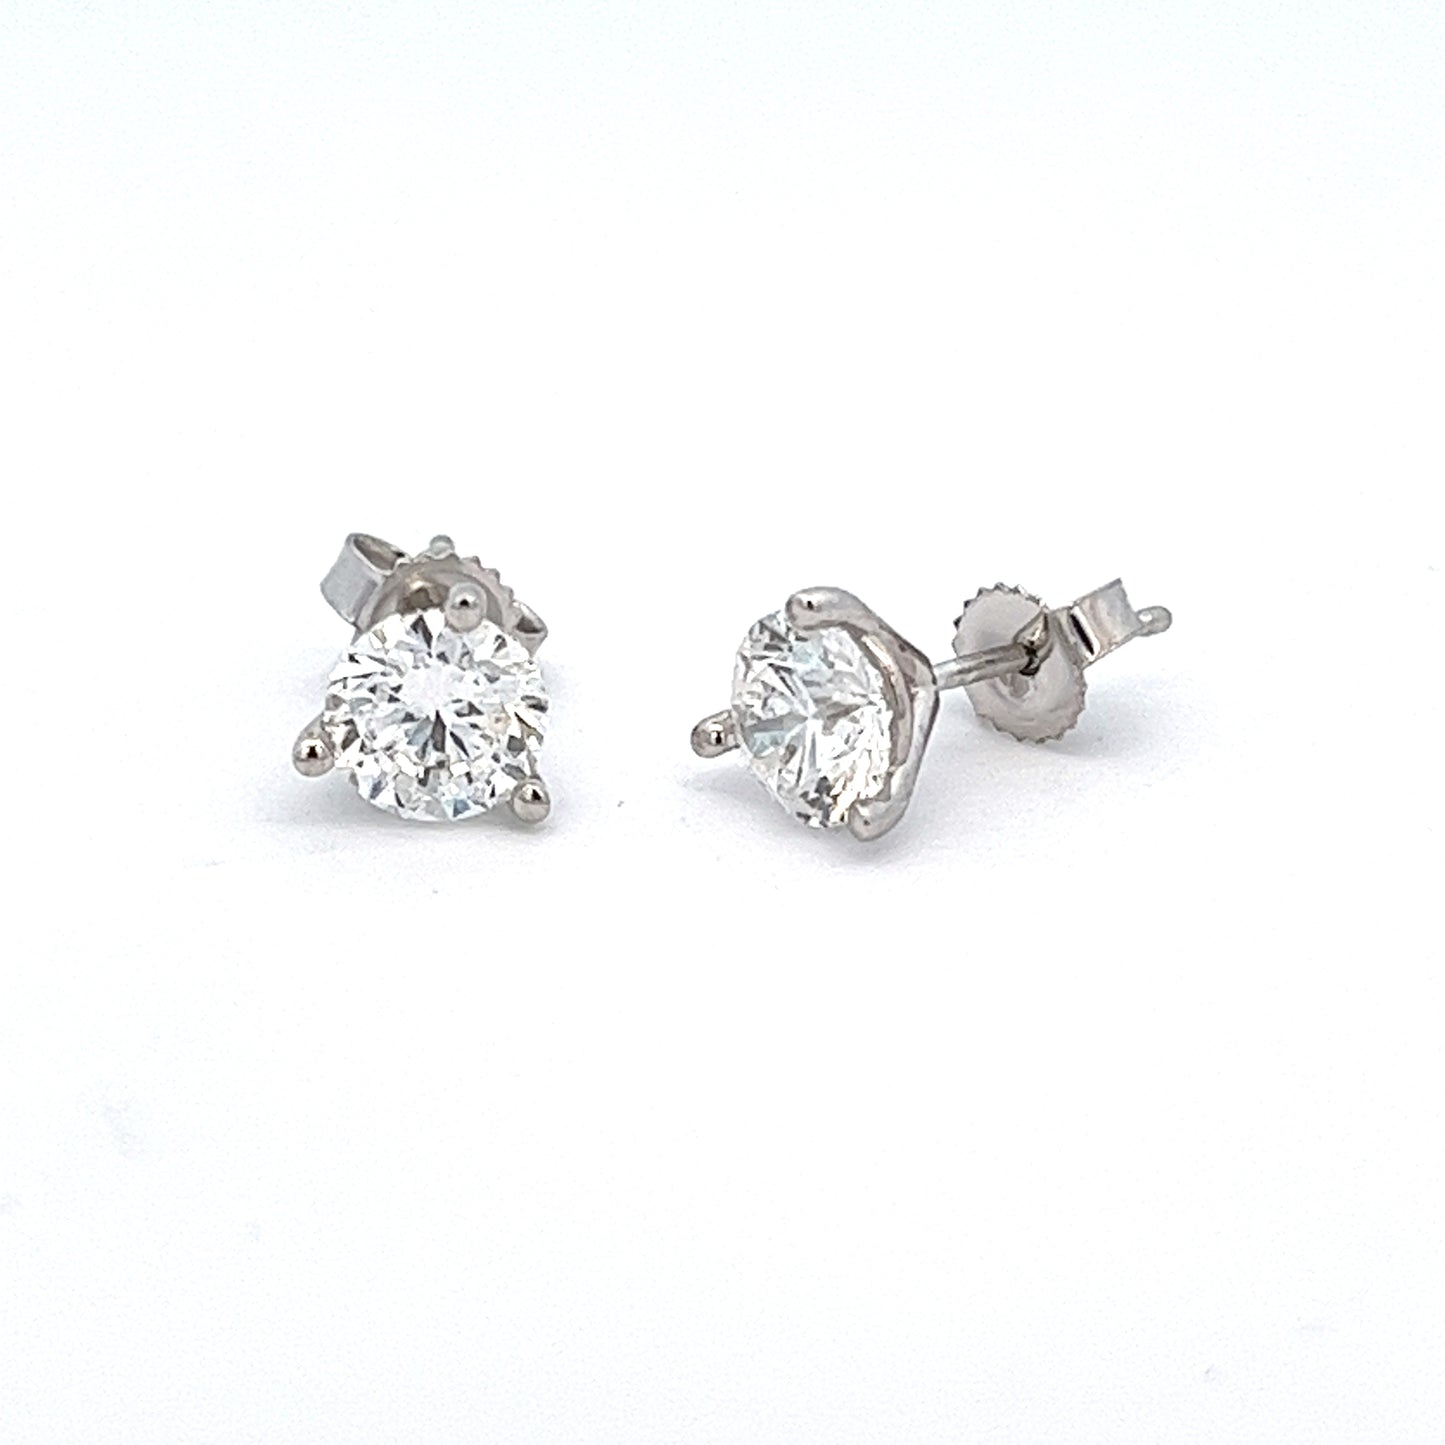 1.43ct total weight round brilliant cut diamond stud earrings